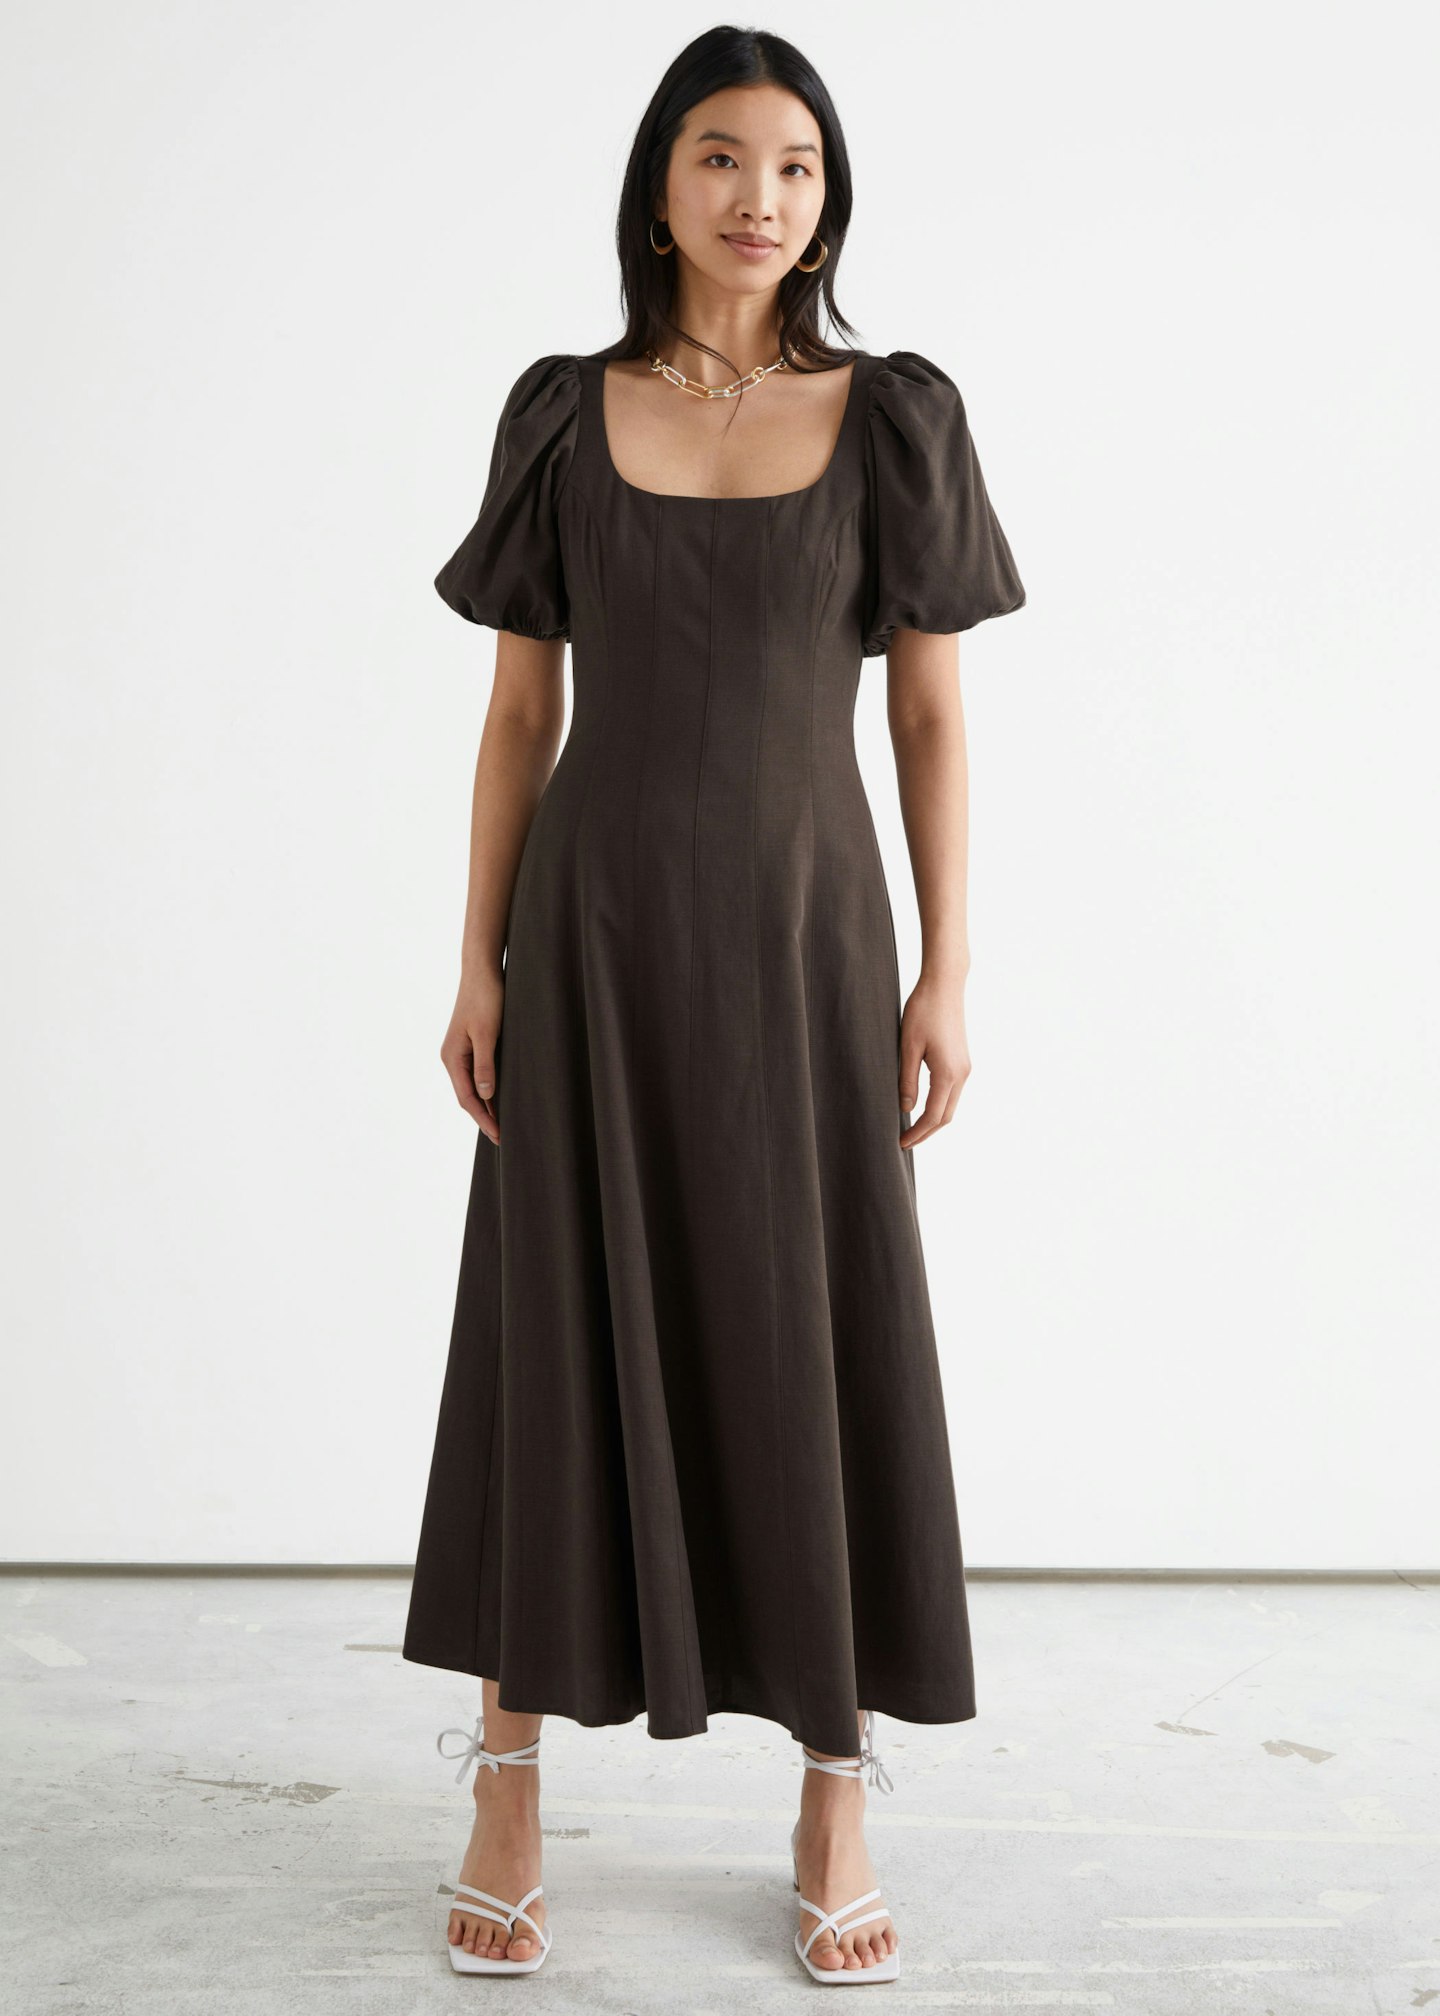 & Other Stories, Open-Back Puff-Sleeve Midi Dress, £95